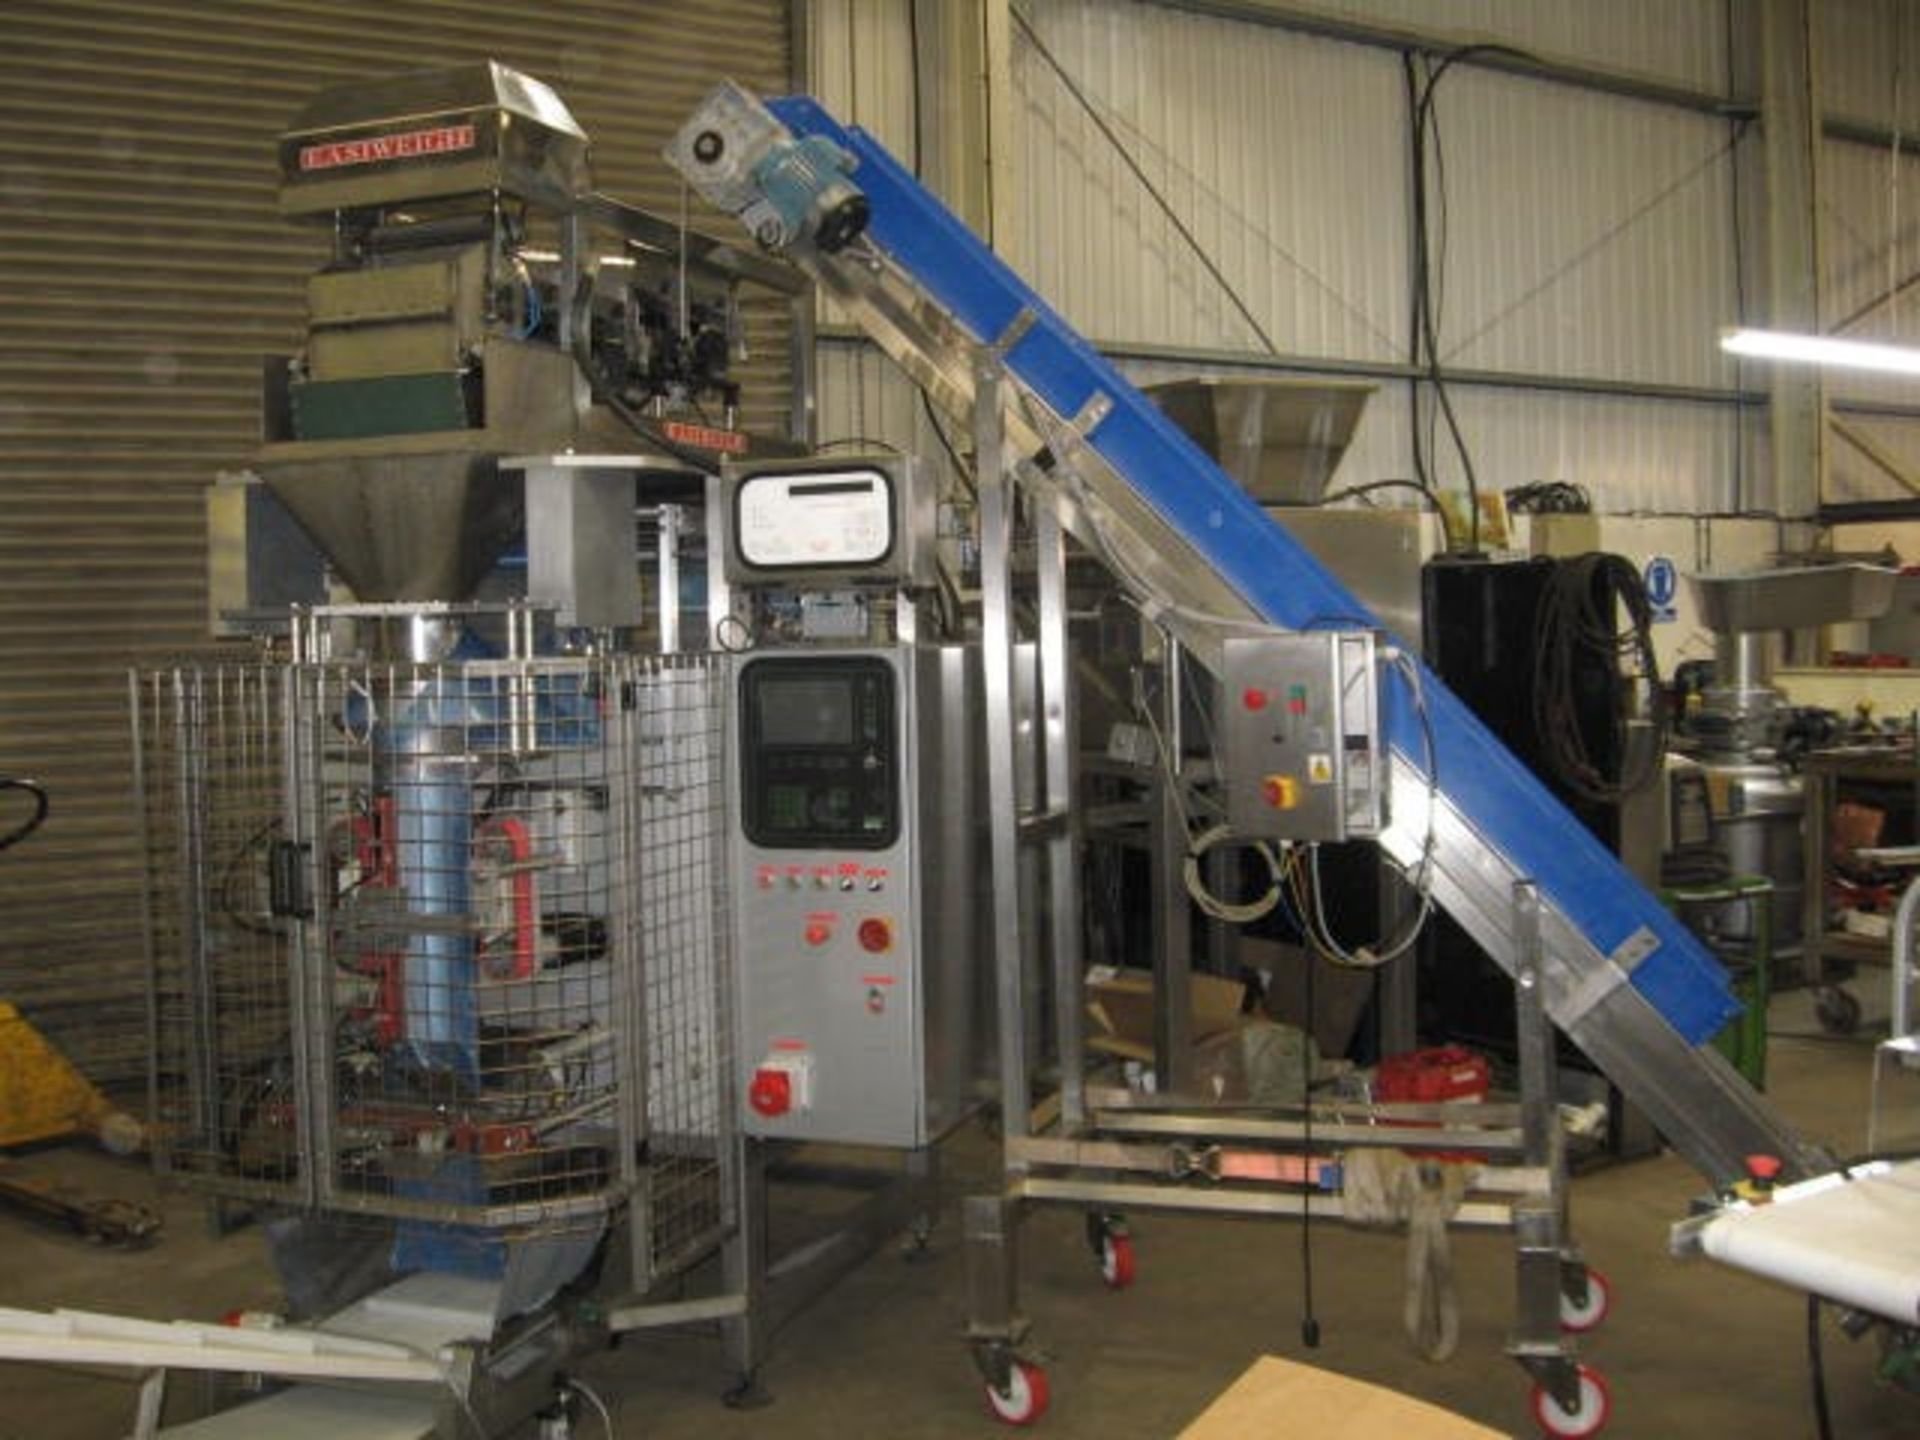 EASIWEIGH LINEAR WEIGHER WITH INNOTECH VFFS BAGGER - Image 6 of 9